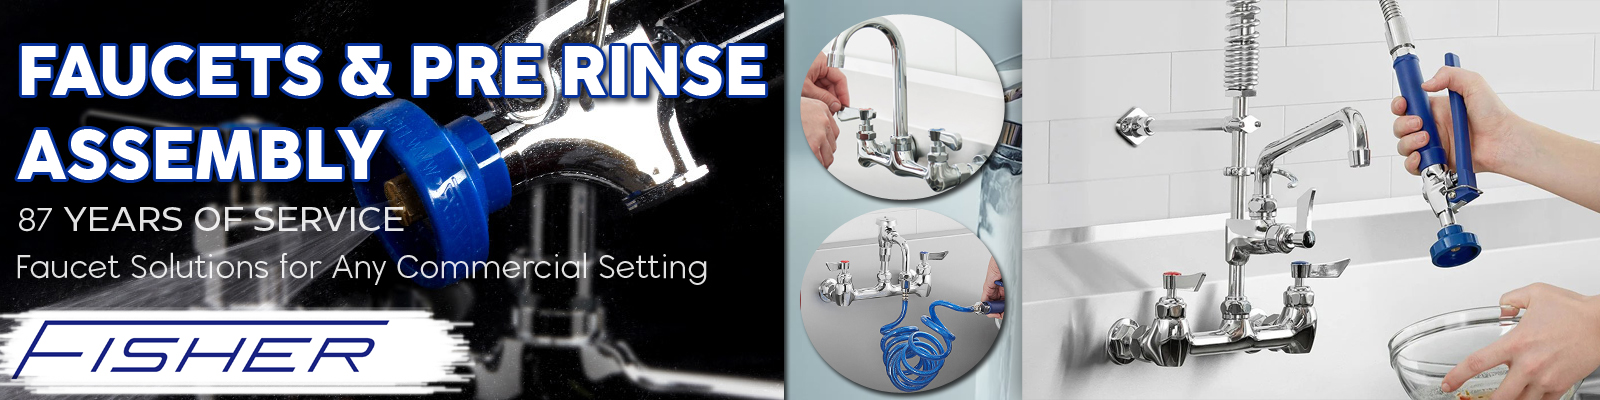 Fisher Commercial Faucets & Plumbing Equipment